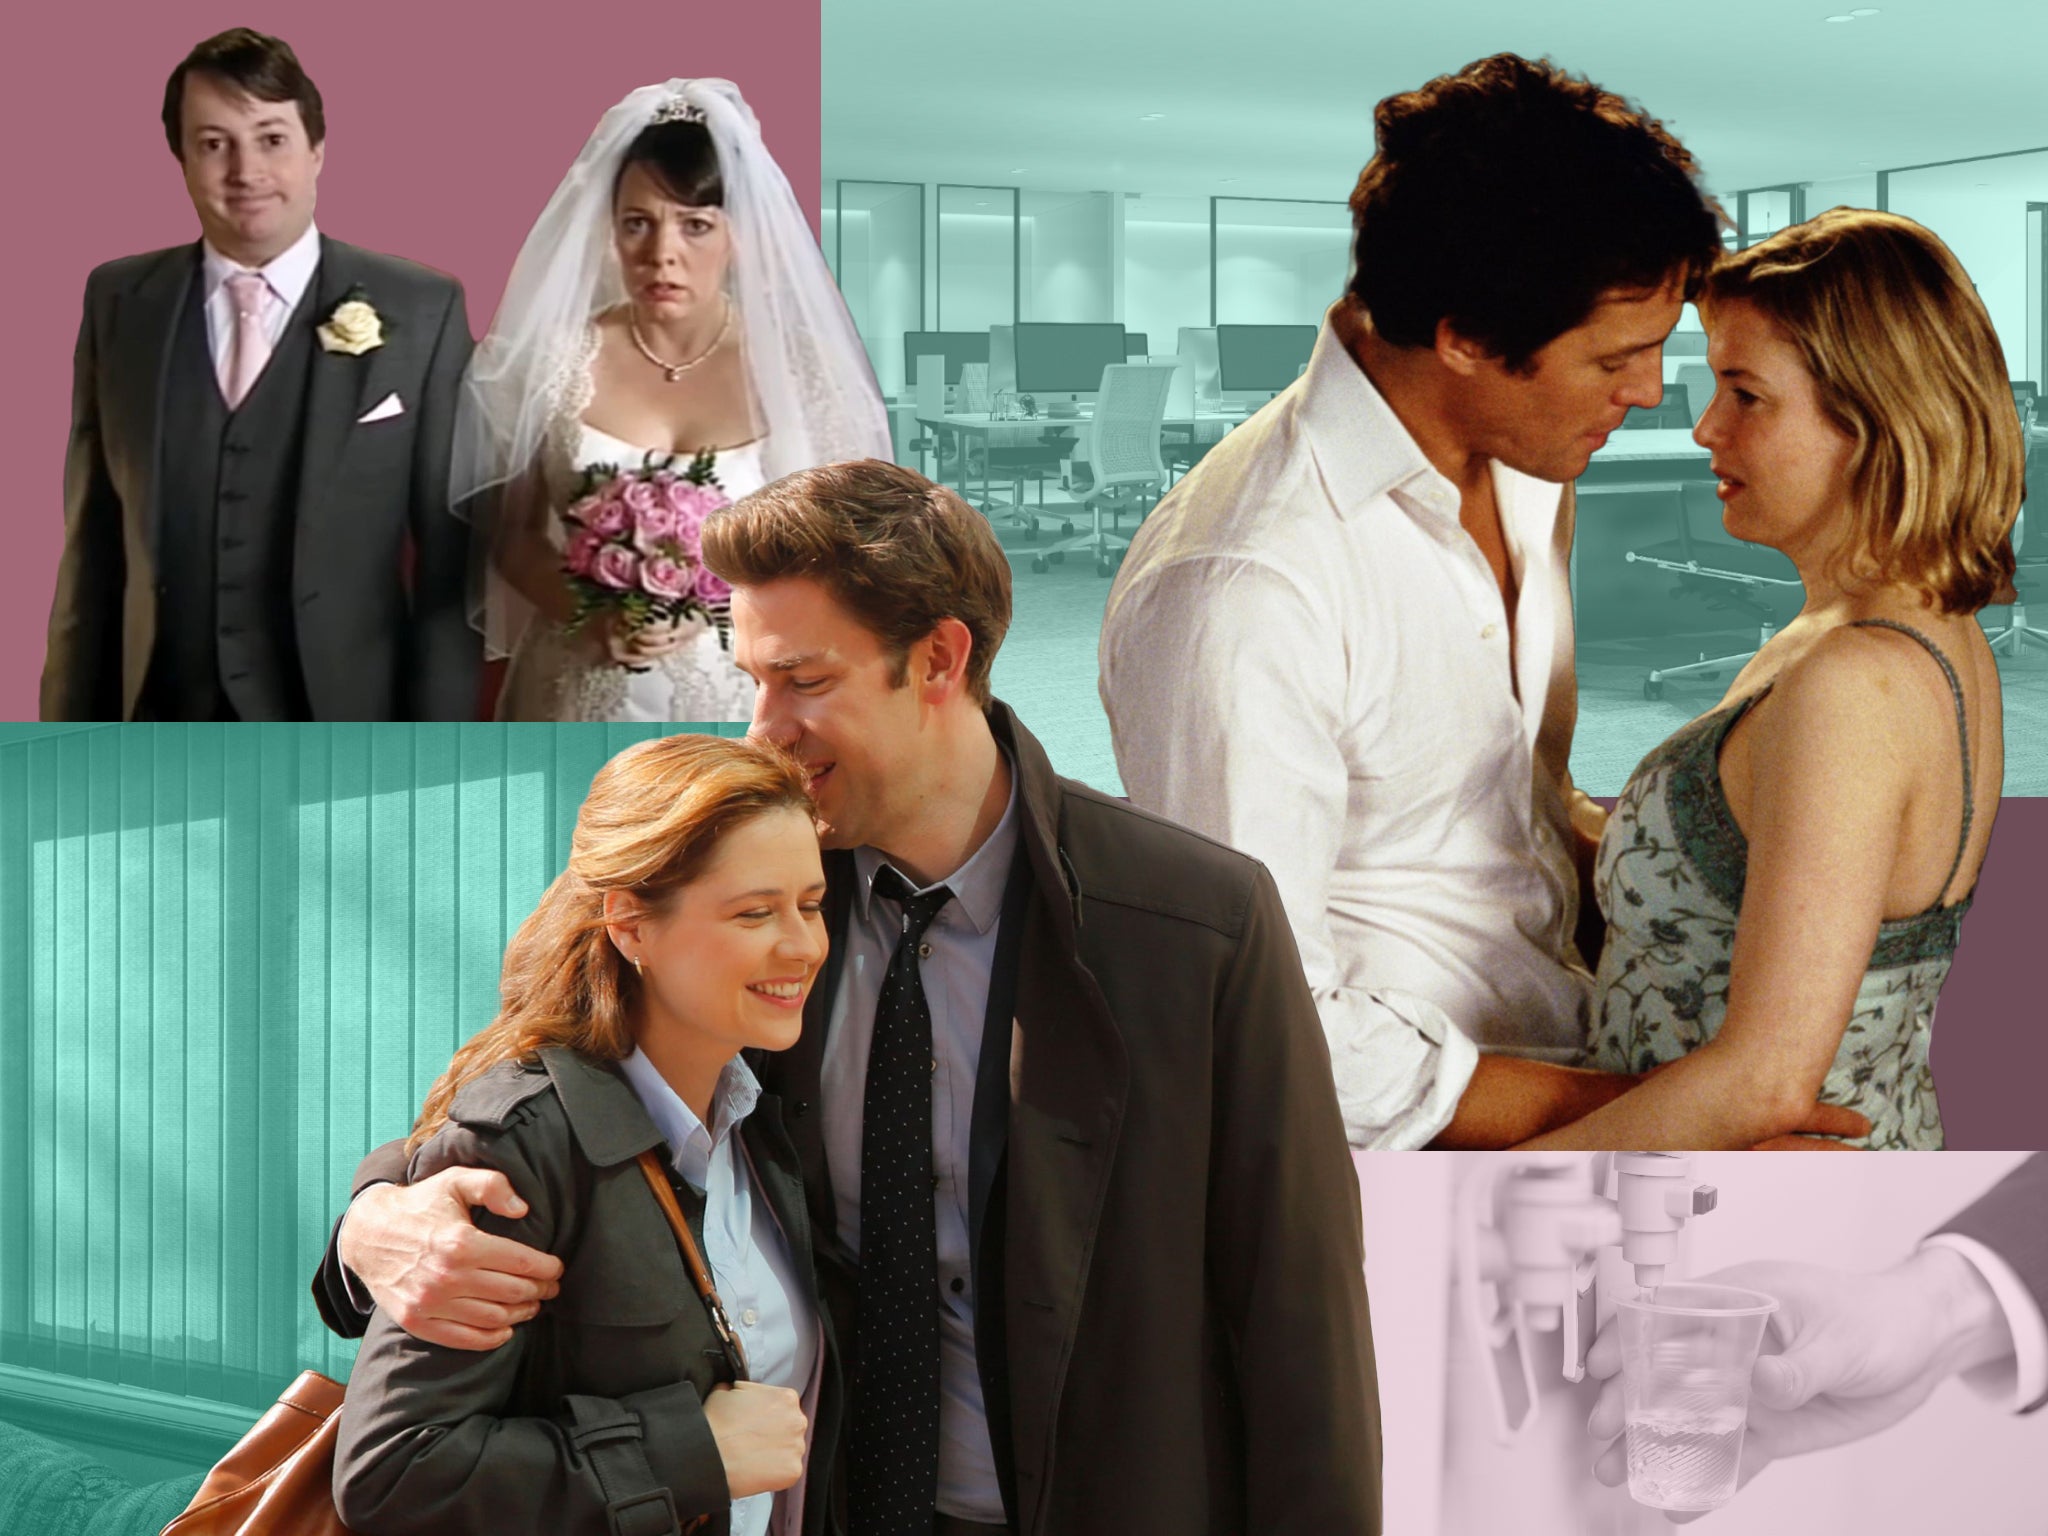 Popular culture is fascinated by the office affair